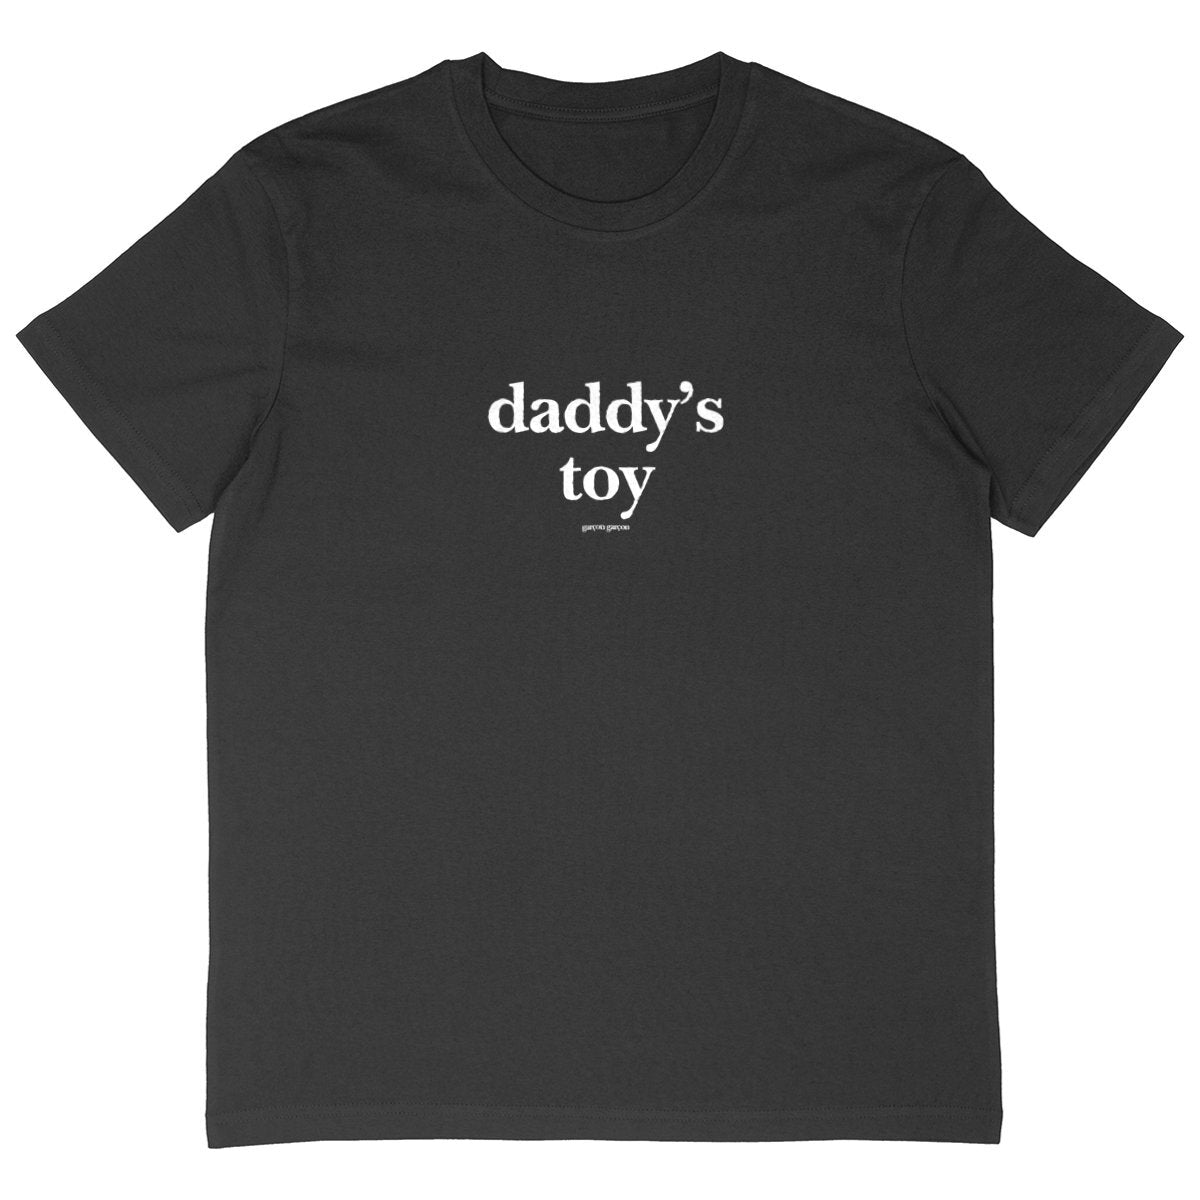 daddy's toy tee oversized. garçon garçon tee oversize BLACK. Dive into the essence of Parisian cool with this oversized tee. The subtle 'garçon garçon' signature whispers a chic narrative, offering a slice of the city's famed elegance. Perfect for those who speak style with simplicity.